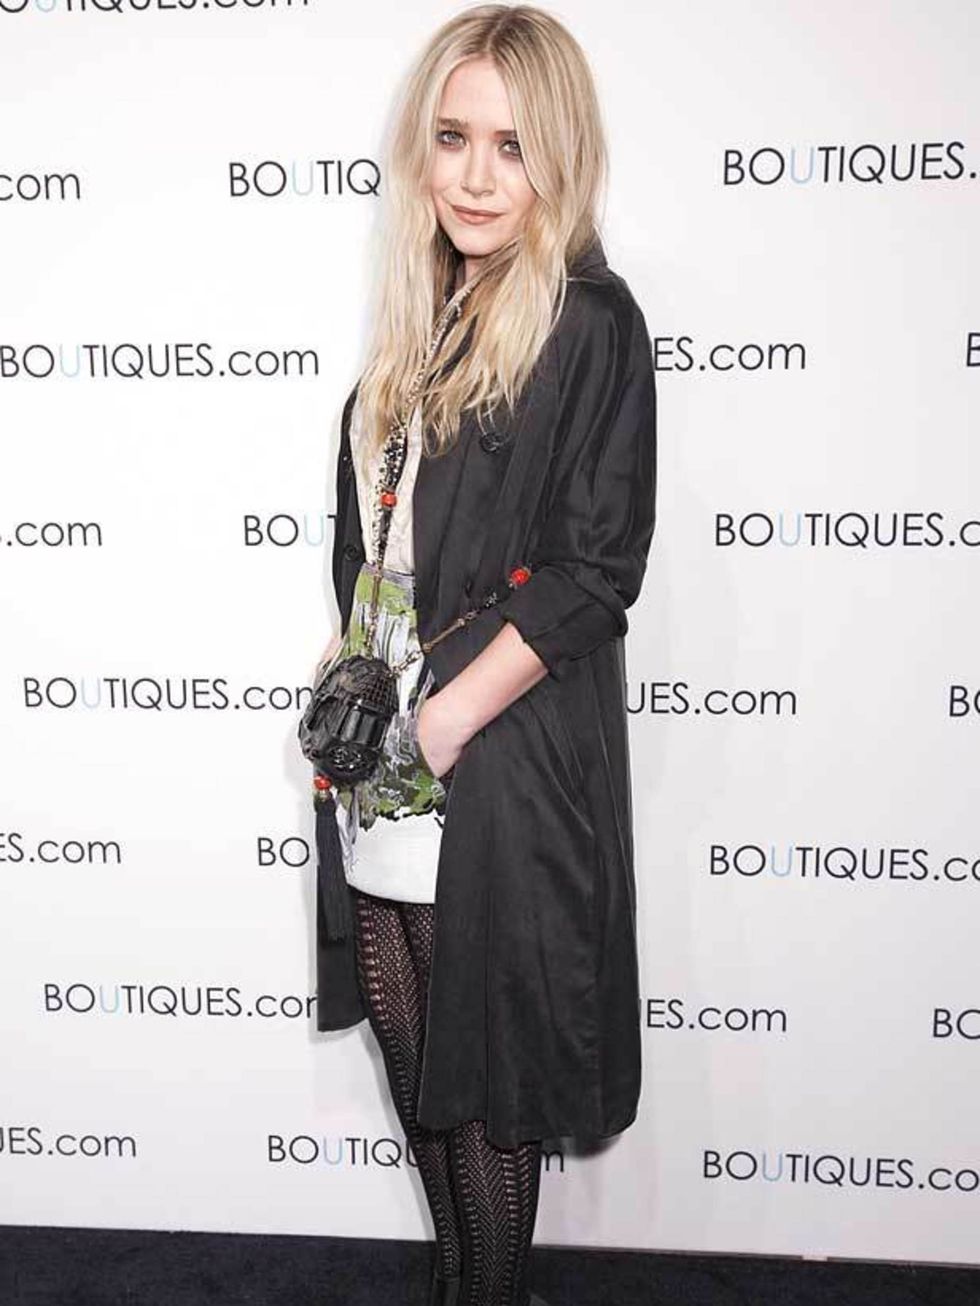 <p><a href="http://www.elleuk.com/starstyle/style-files/%28section%29/Mary-Kate-Olsen">Mary-Kate Olsen</a> at the Boutiques.com Launch Party by Google, New York, America - 17 Nov 2010</p>